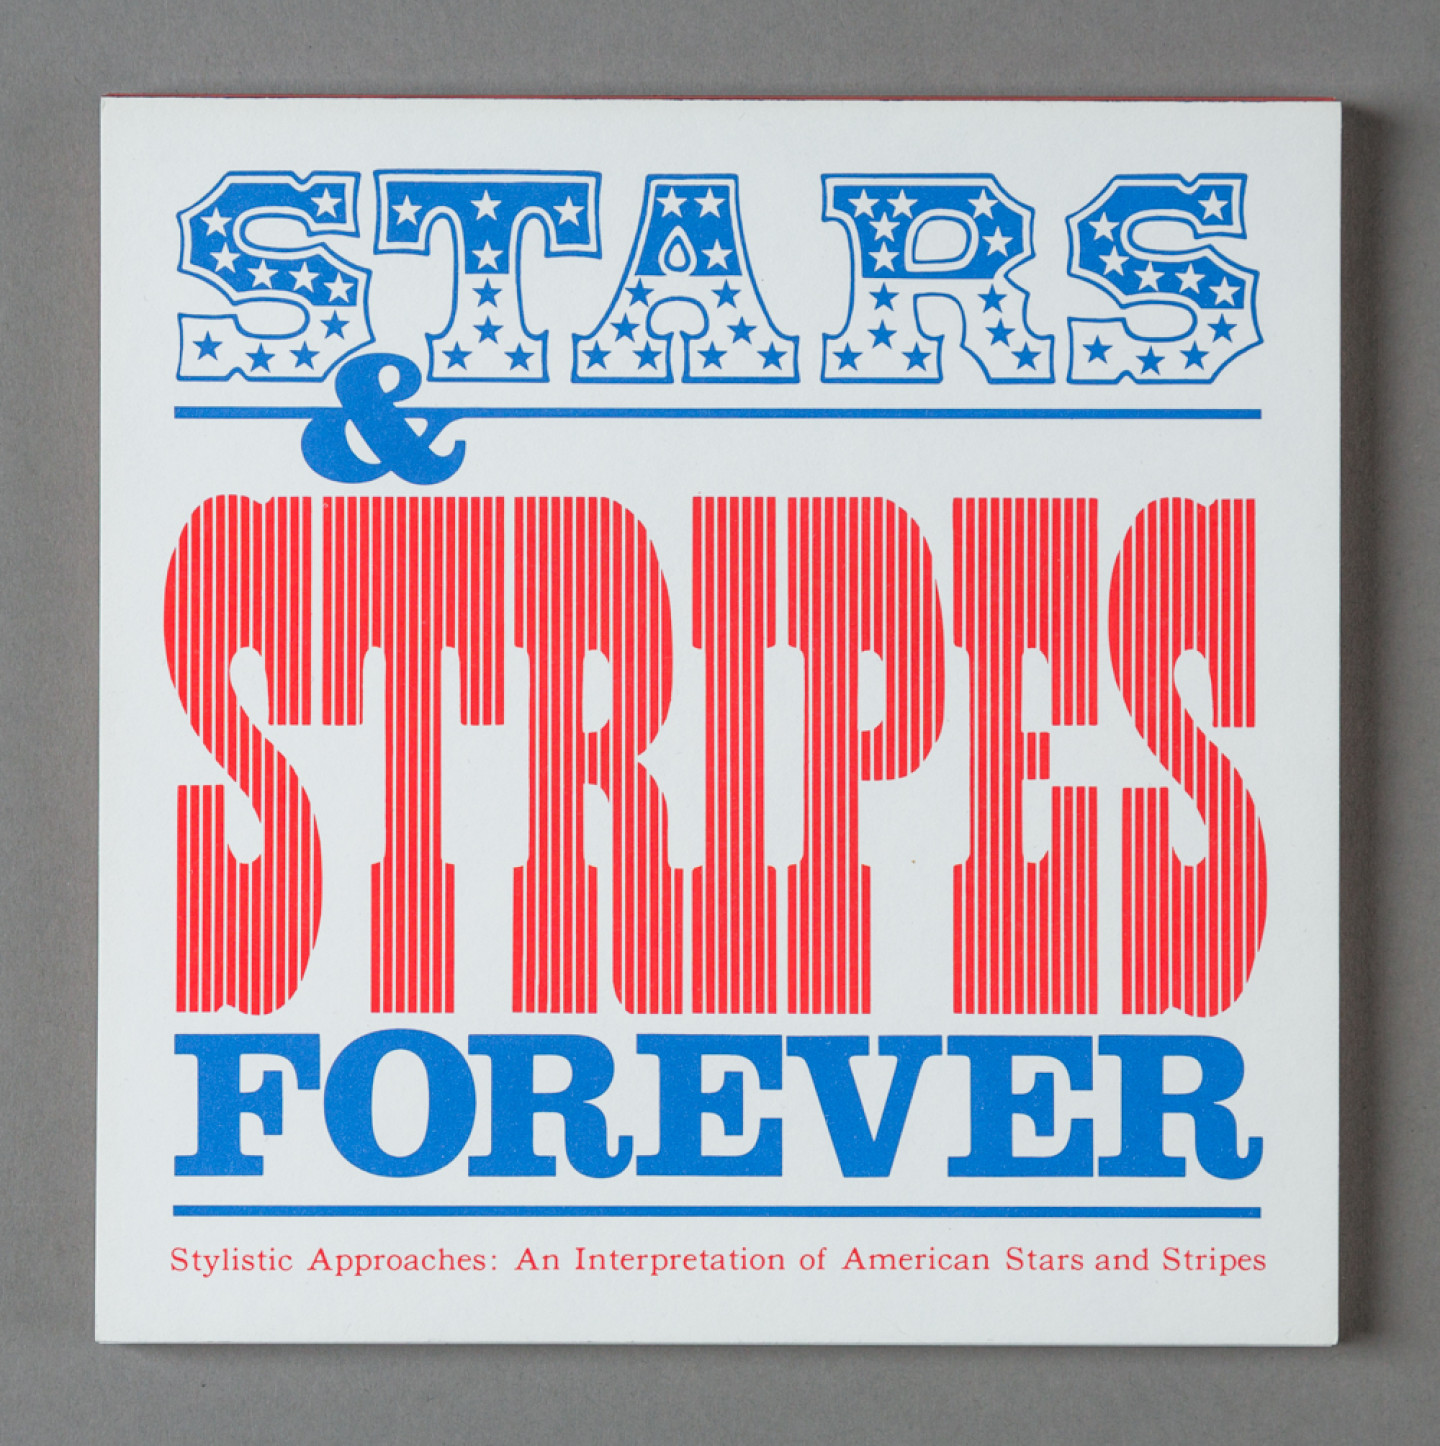 A graphic design that reads "Stars and stripes forever."